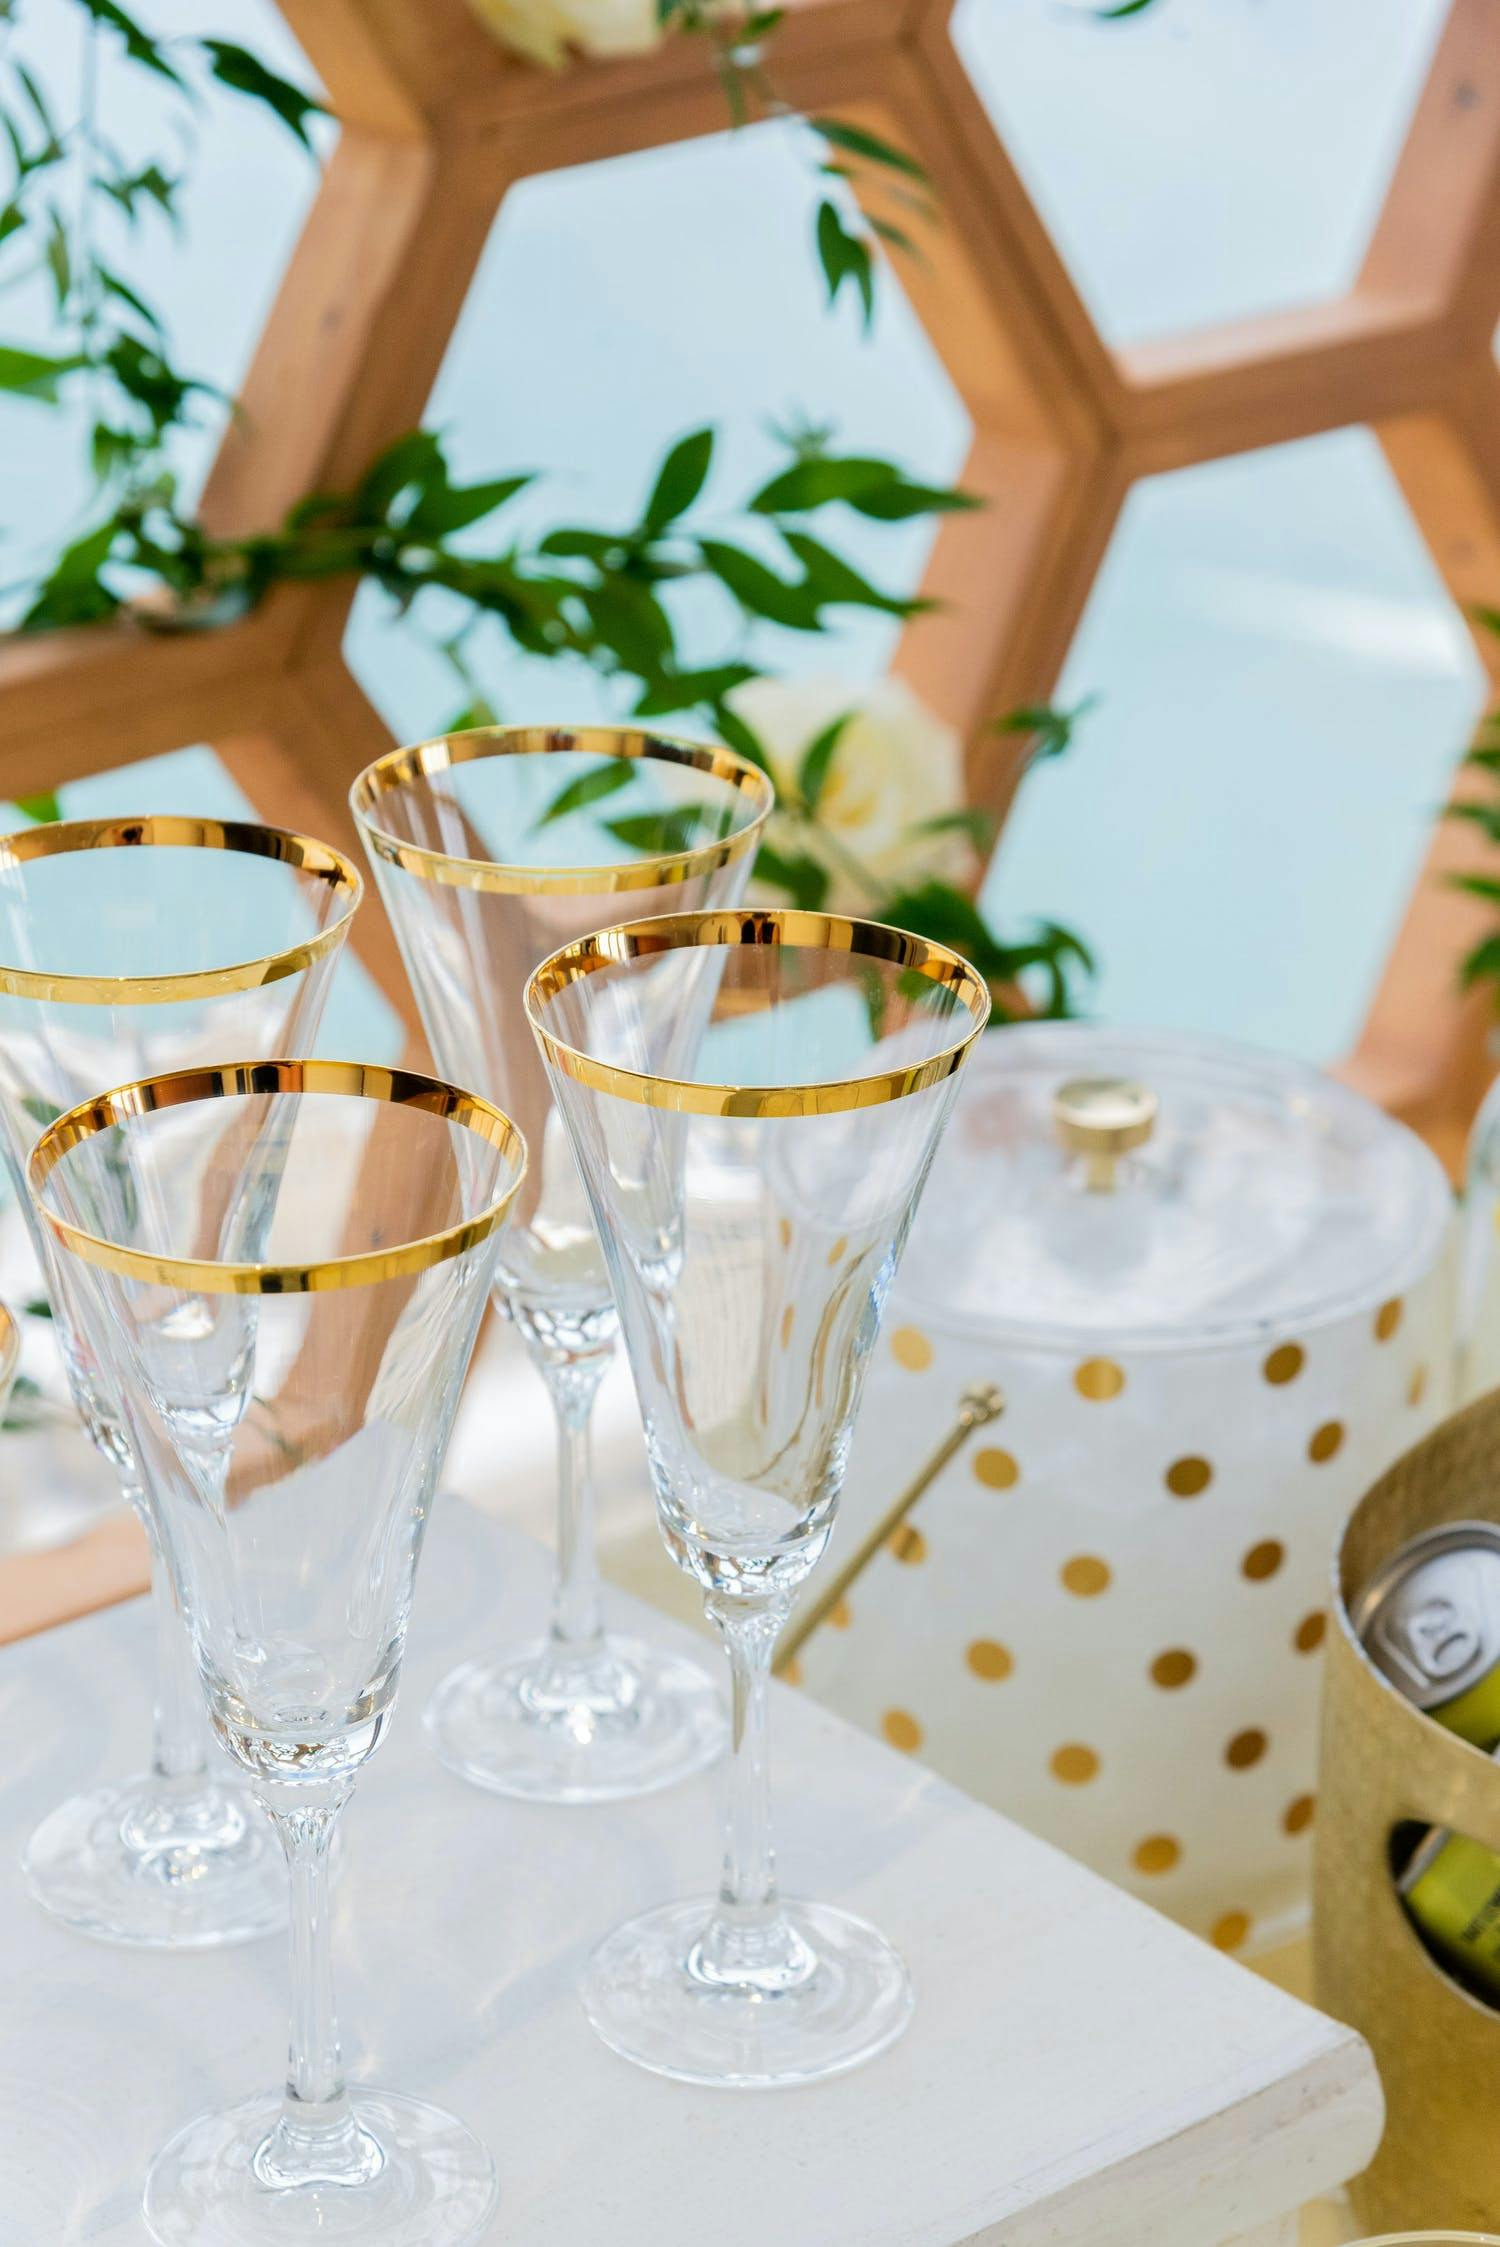 Honey Bee Themed Party With Gold Rimmed Champagne Glasses and Gold Accents | PartySlate